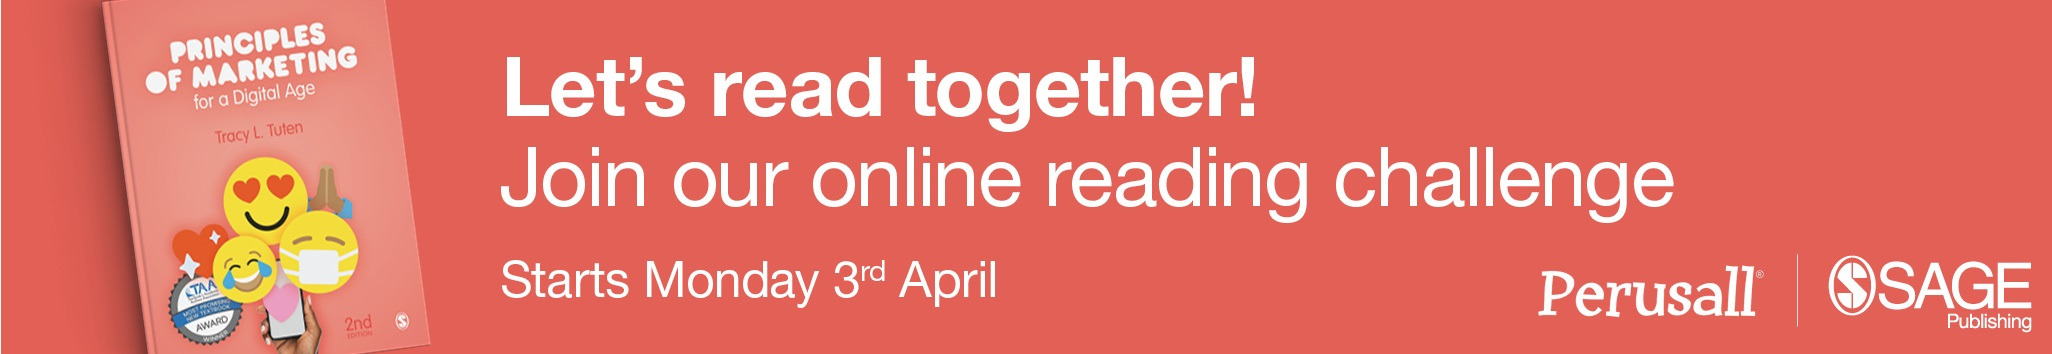 Let's read together Perusall event 3rd April 